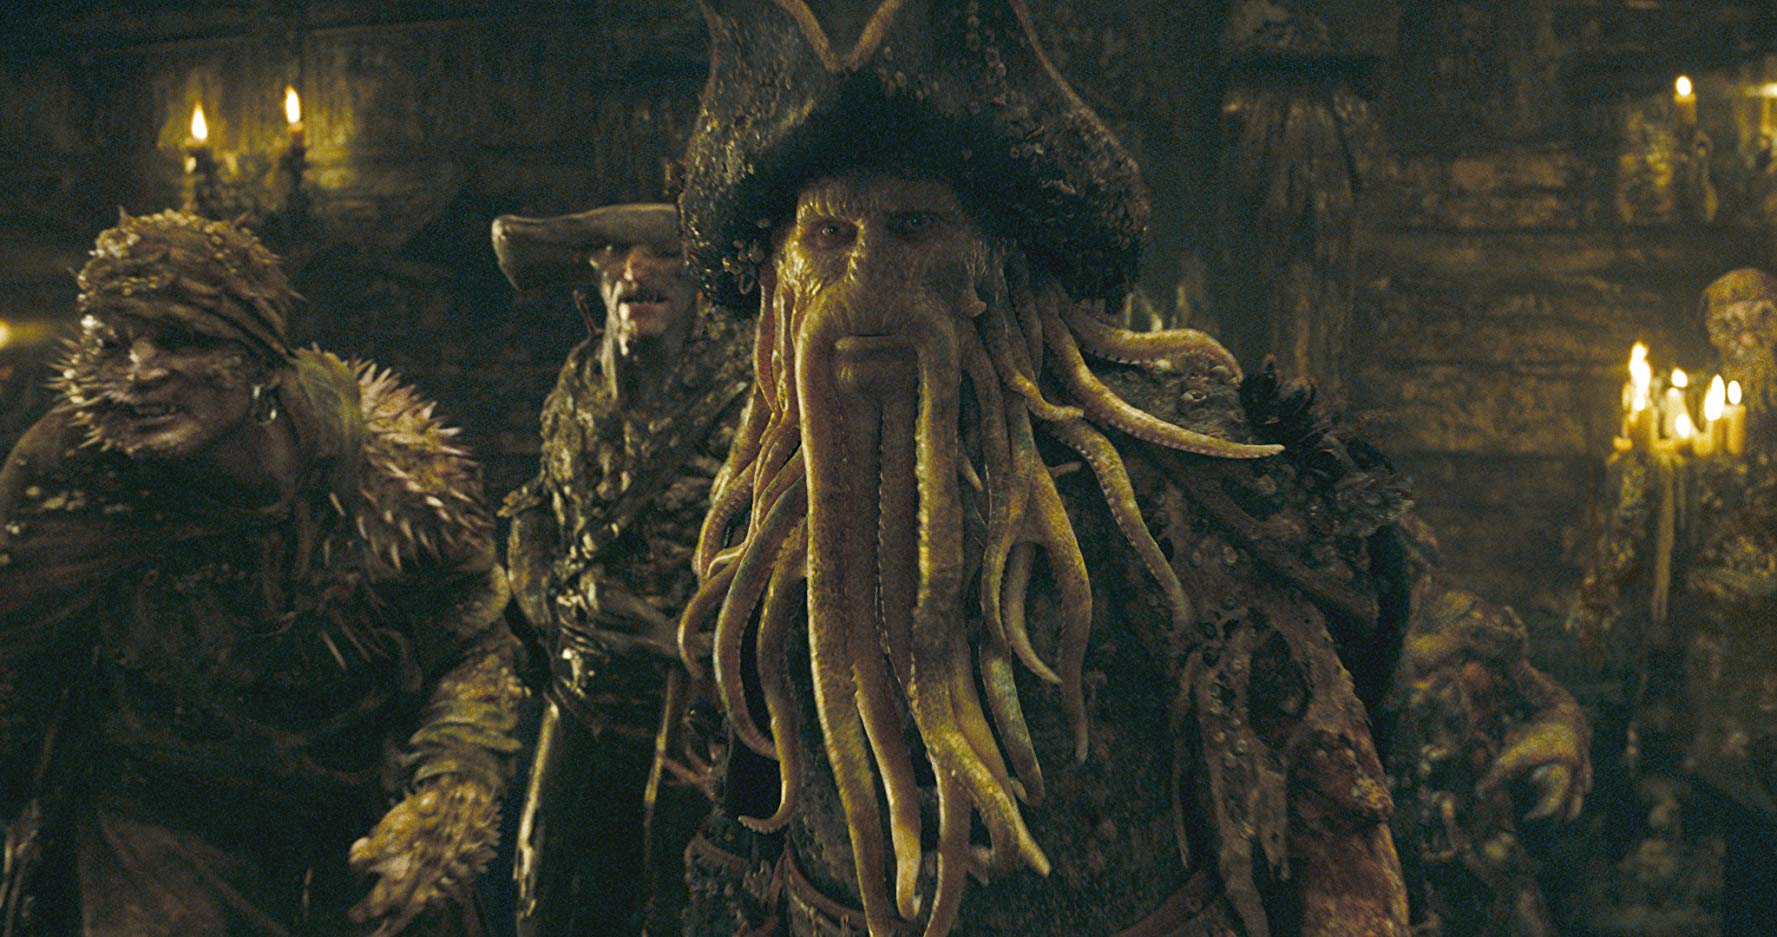 Davy Jones from The Pirates of the Caribbean